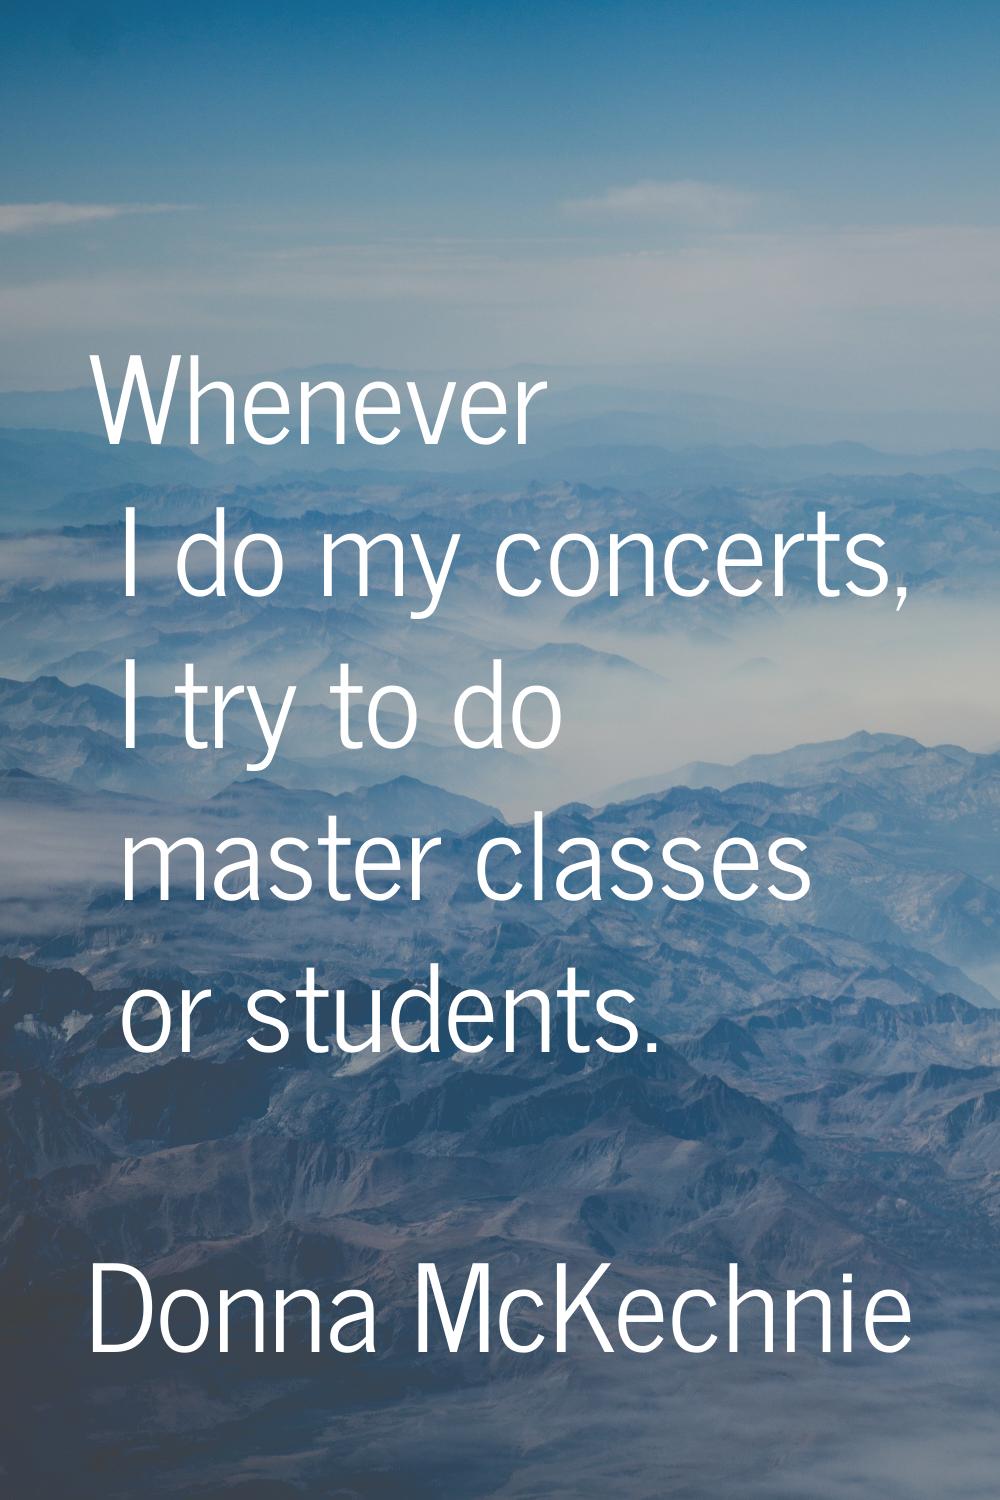 Whenever I do my concerts, I try to do master classes or students.